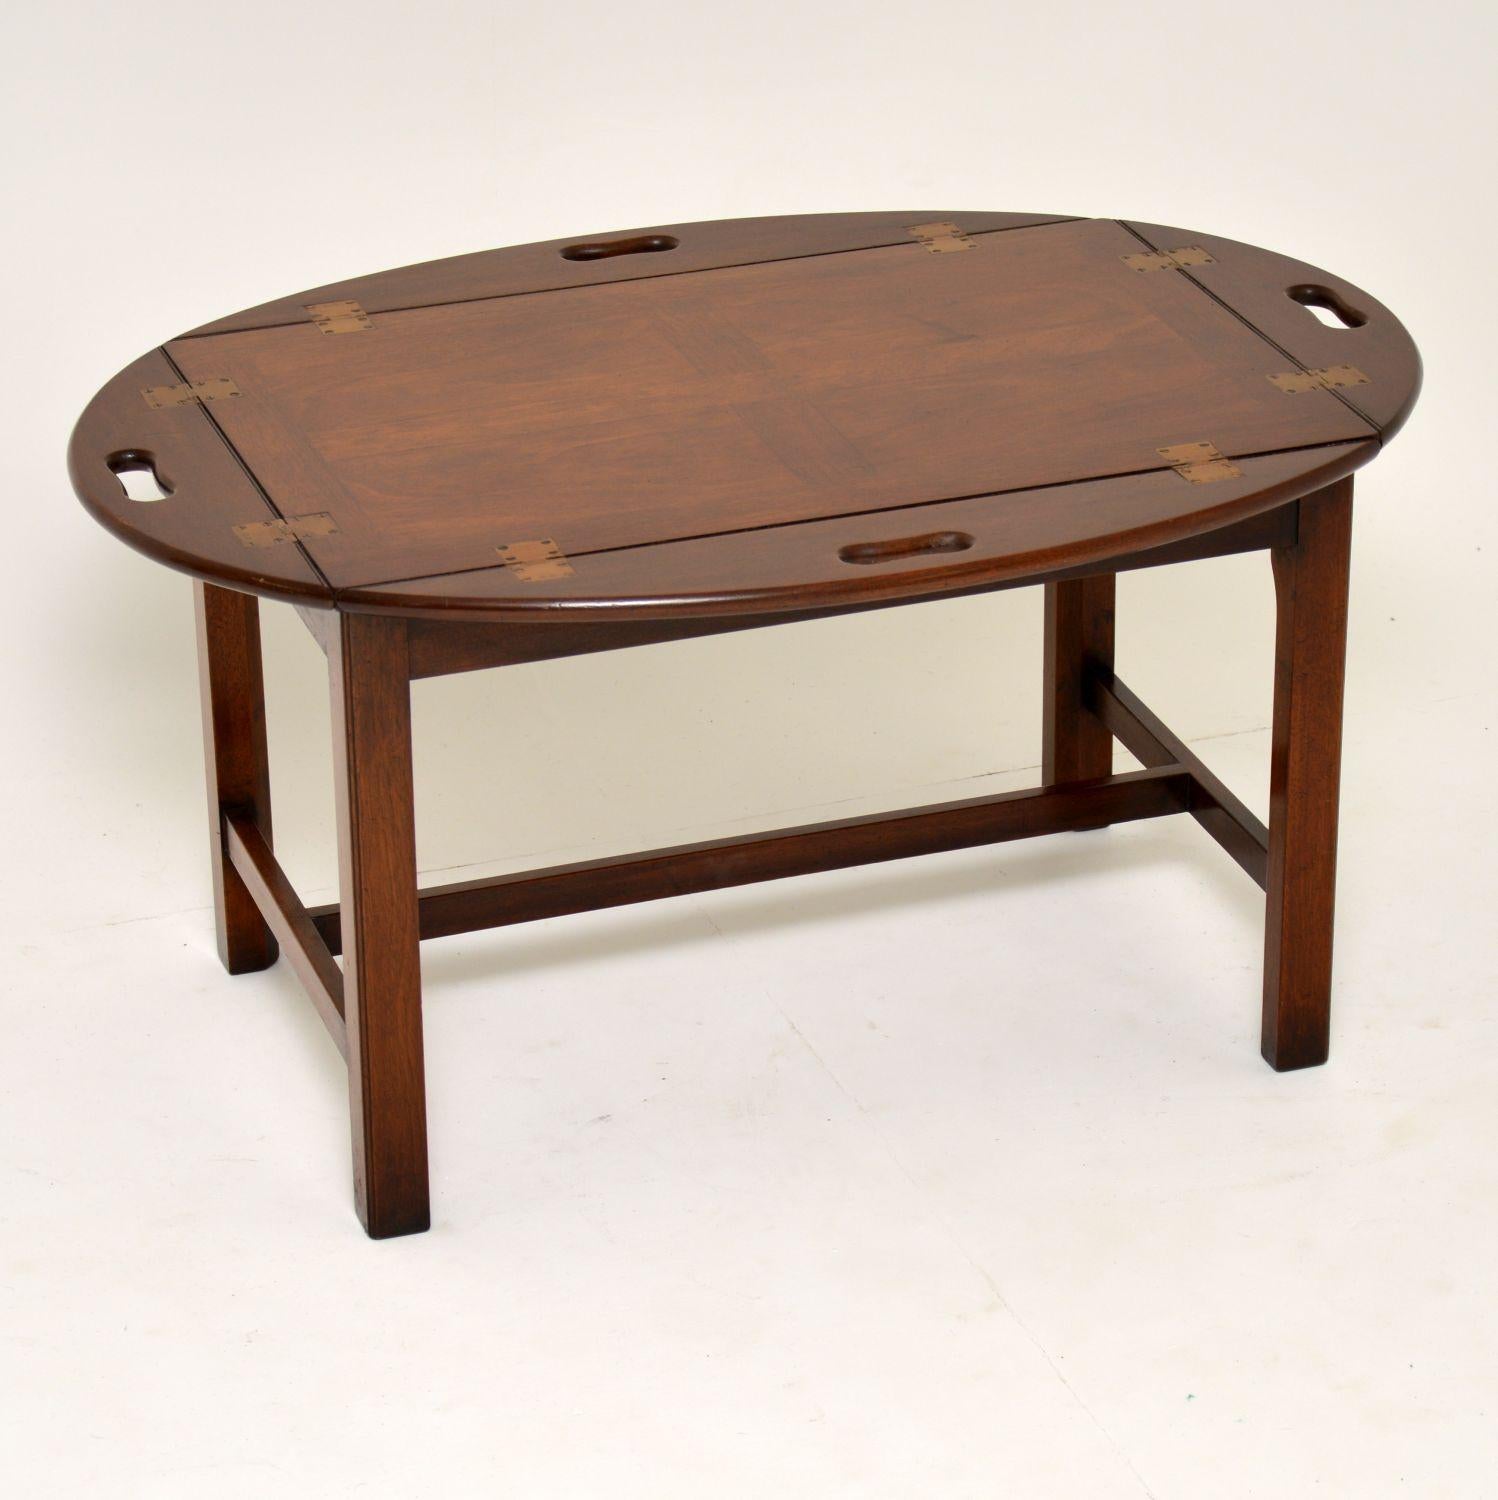 This antique mahogany Georgian style butlers tray coffee table is a great looking item and very practicable too. It’s in excellent condition and dates from circa 1950s period. The table top is panelled with four hinged flaps which have inset